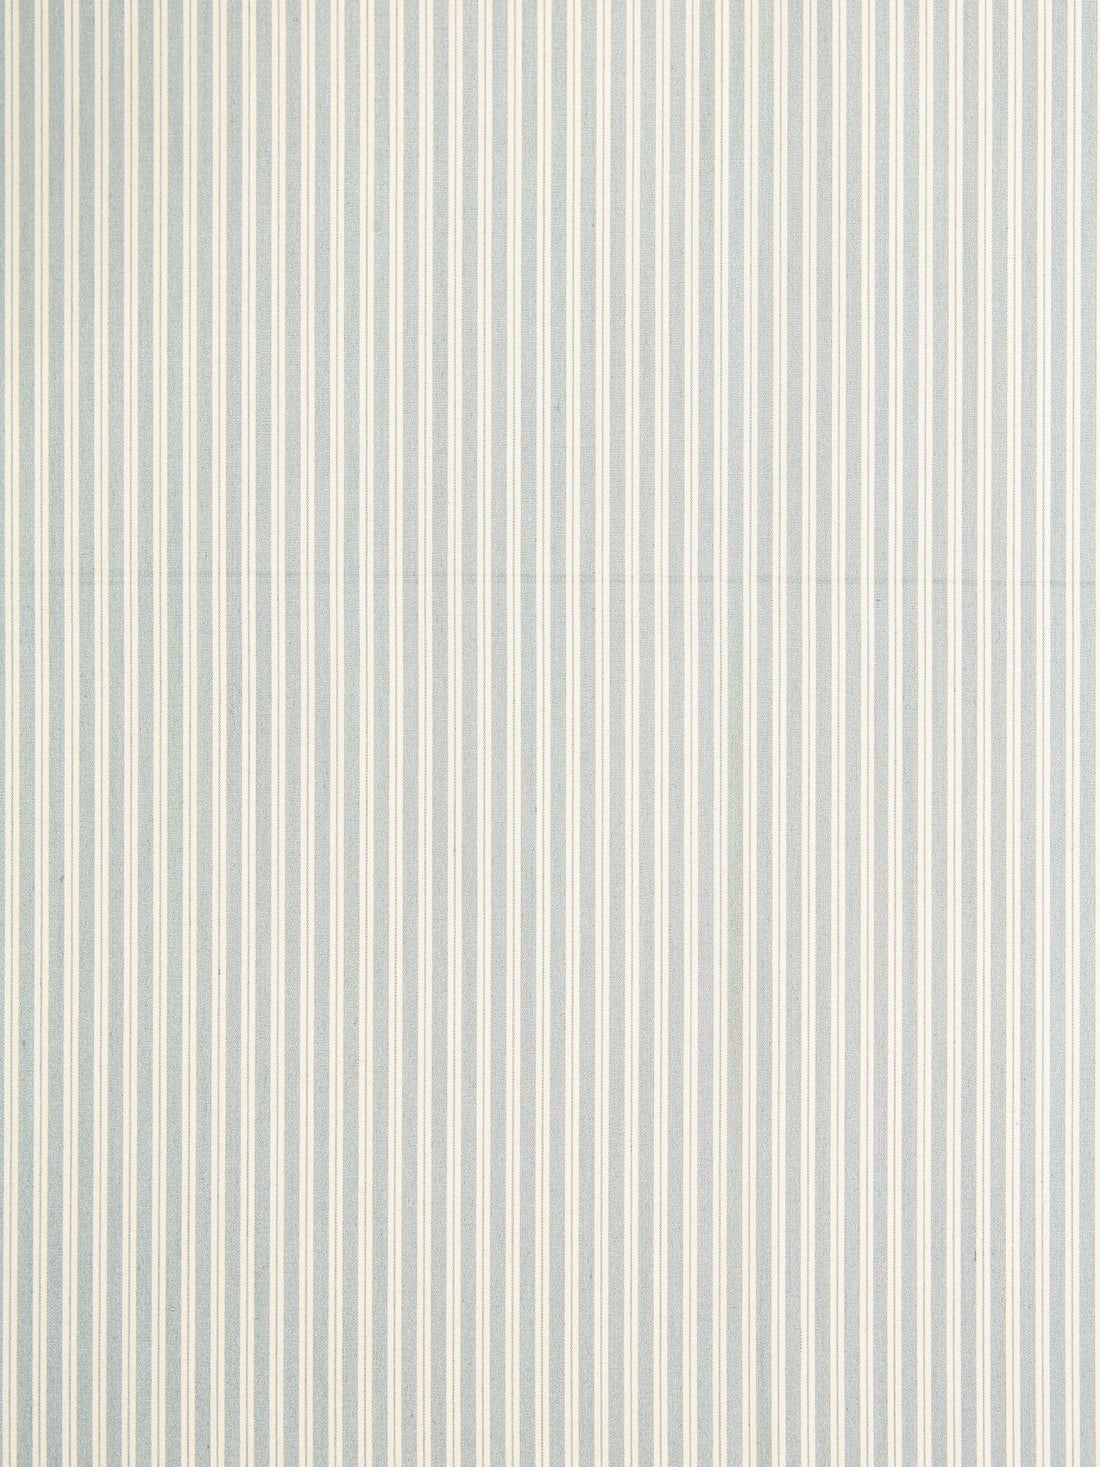 Kent Stripe fabric in pearl grey color - pattern number SC 000236395 - by Scalamandre in the Scalamandre Fabrics Book 1 collection